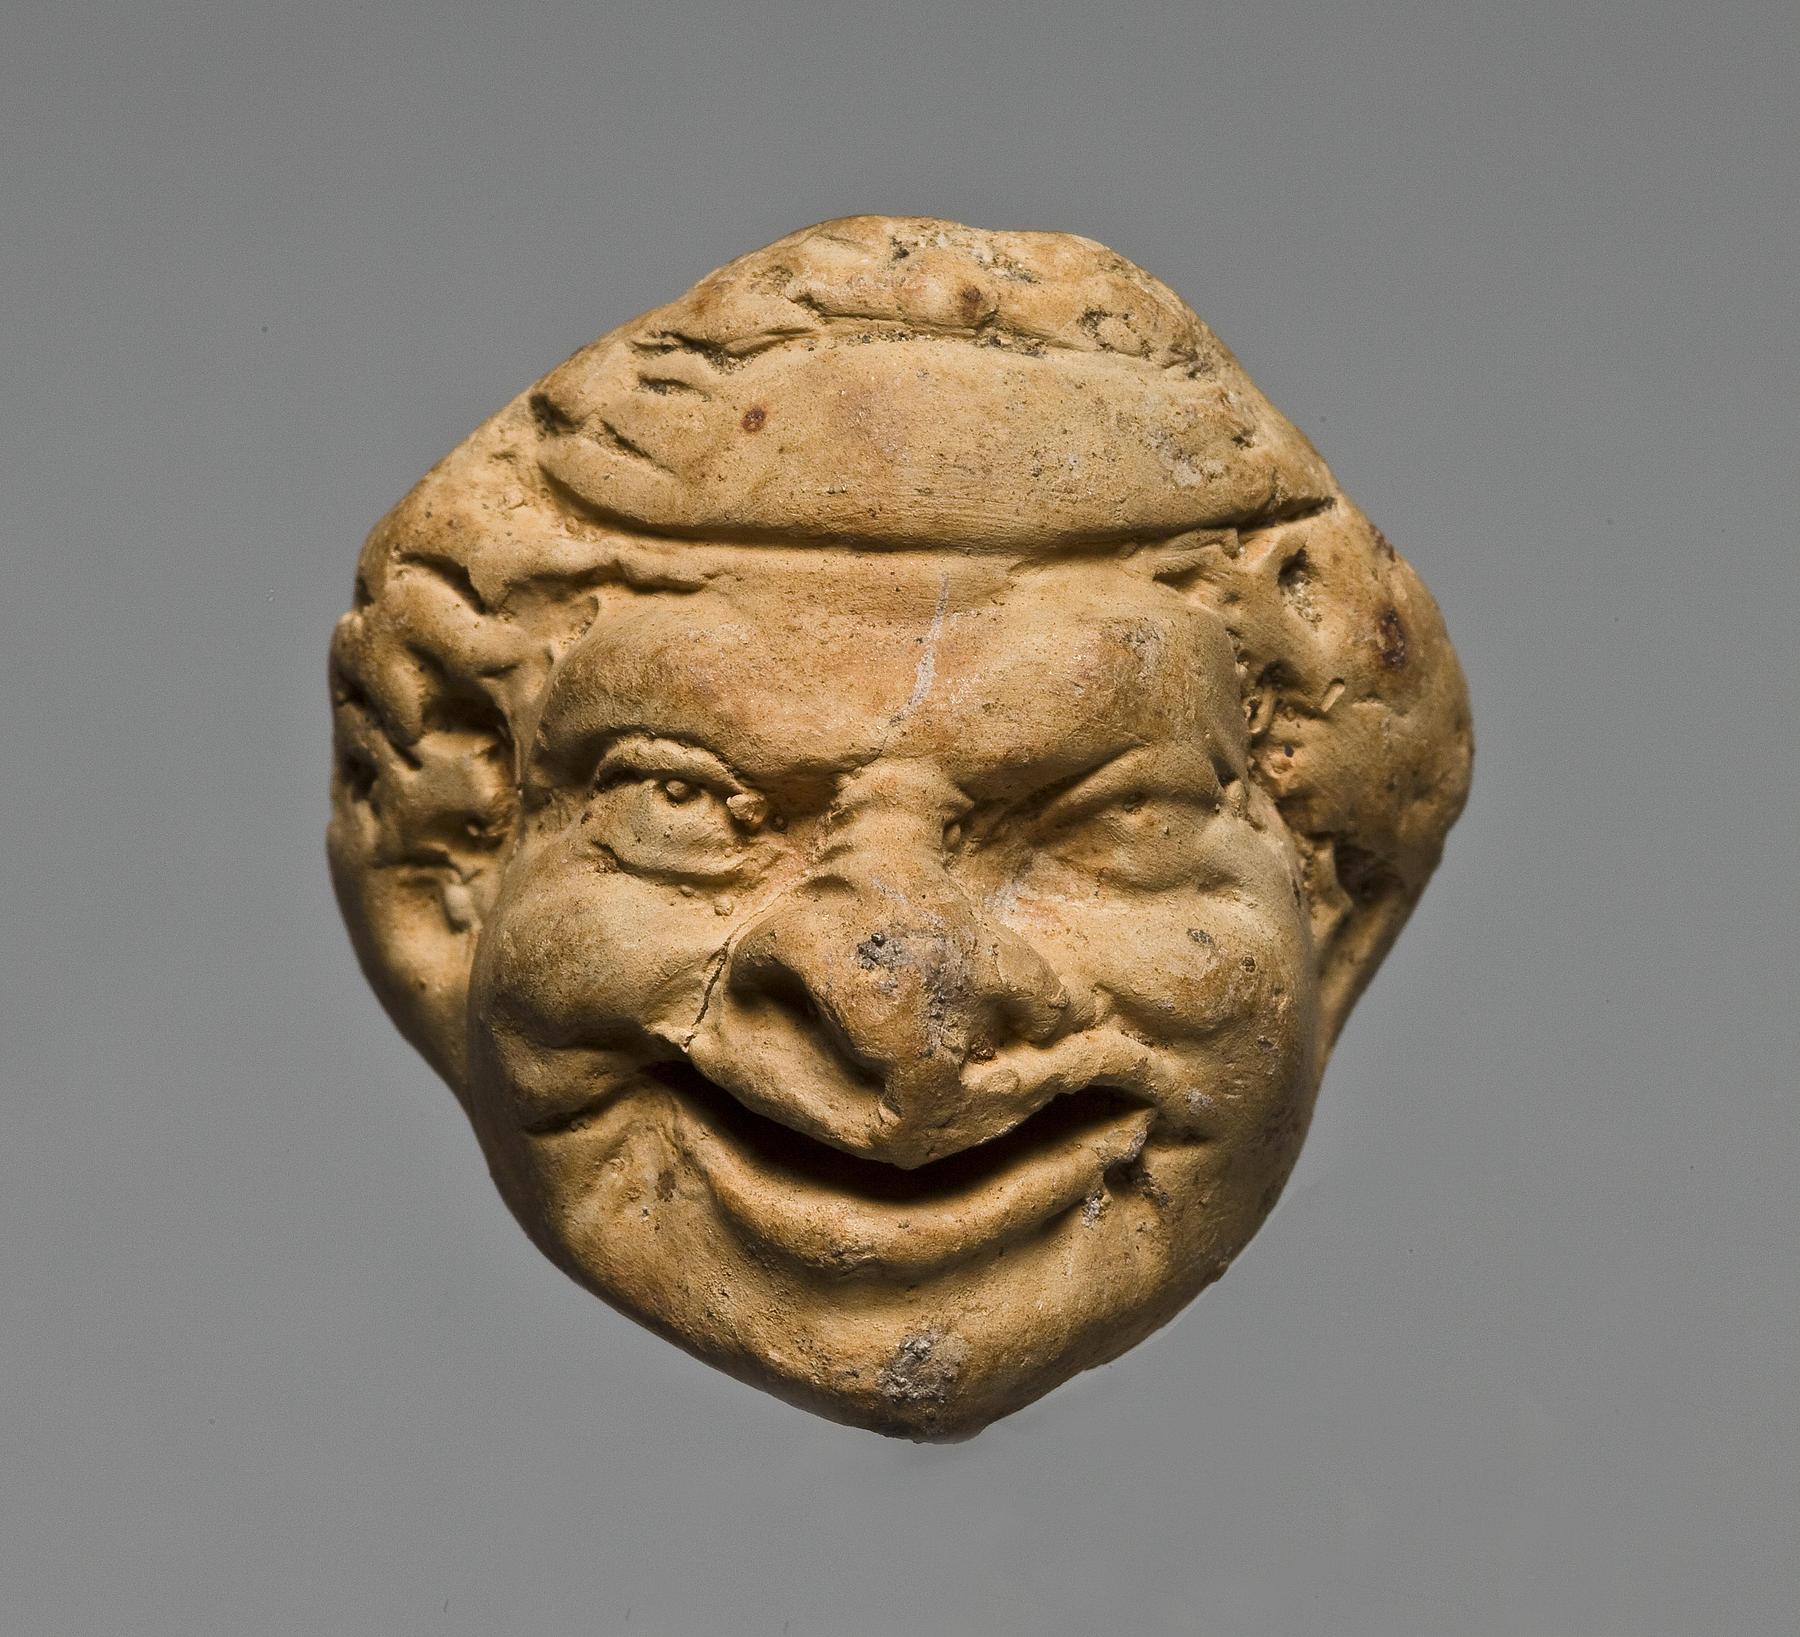 Miniature head with theatre mask, H1047